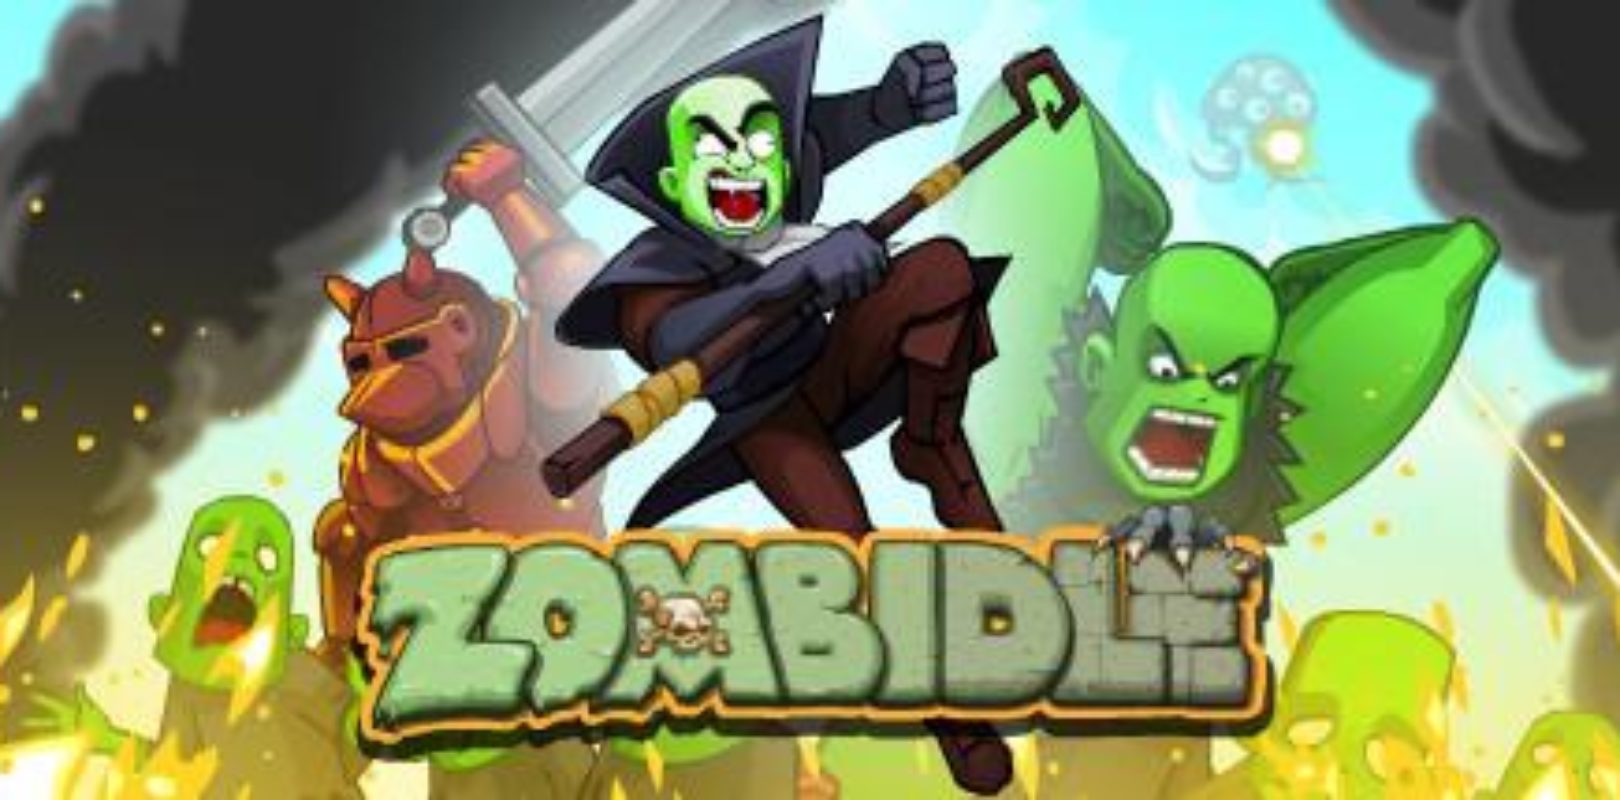 zombidle remonstered cheats